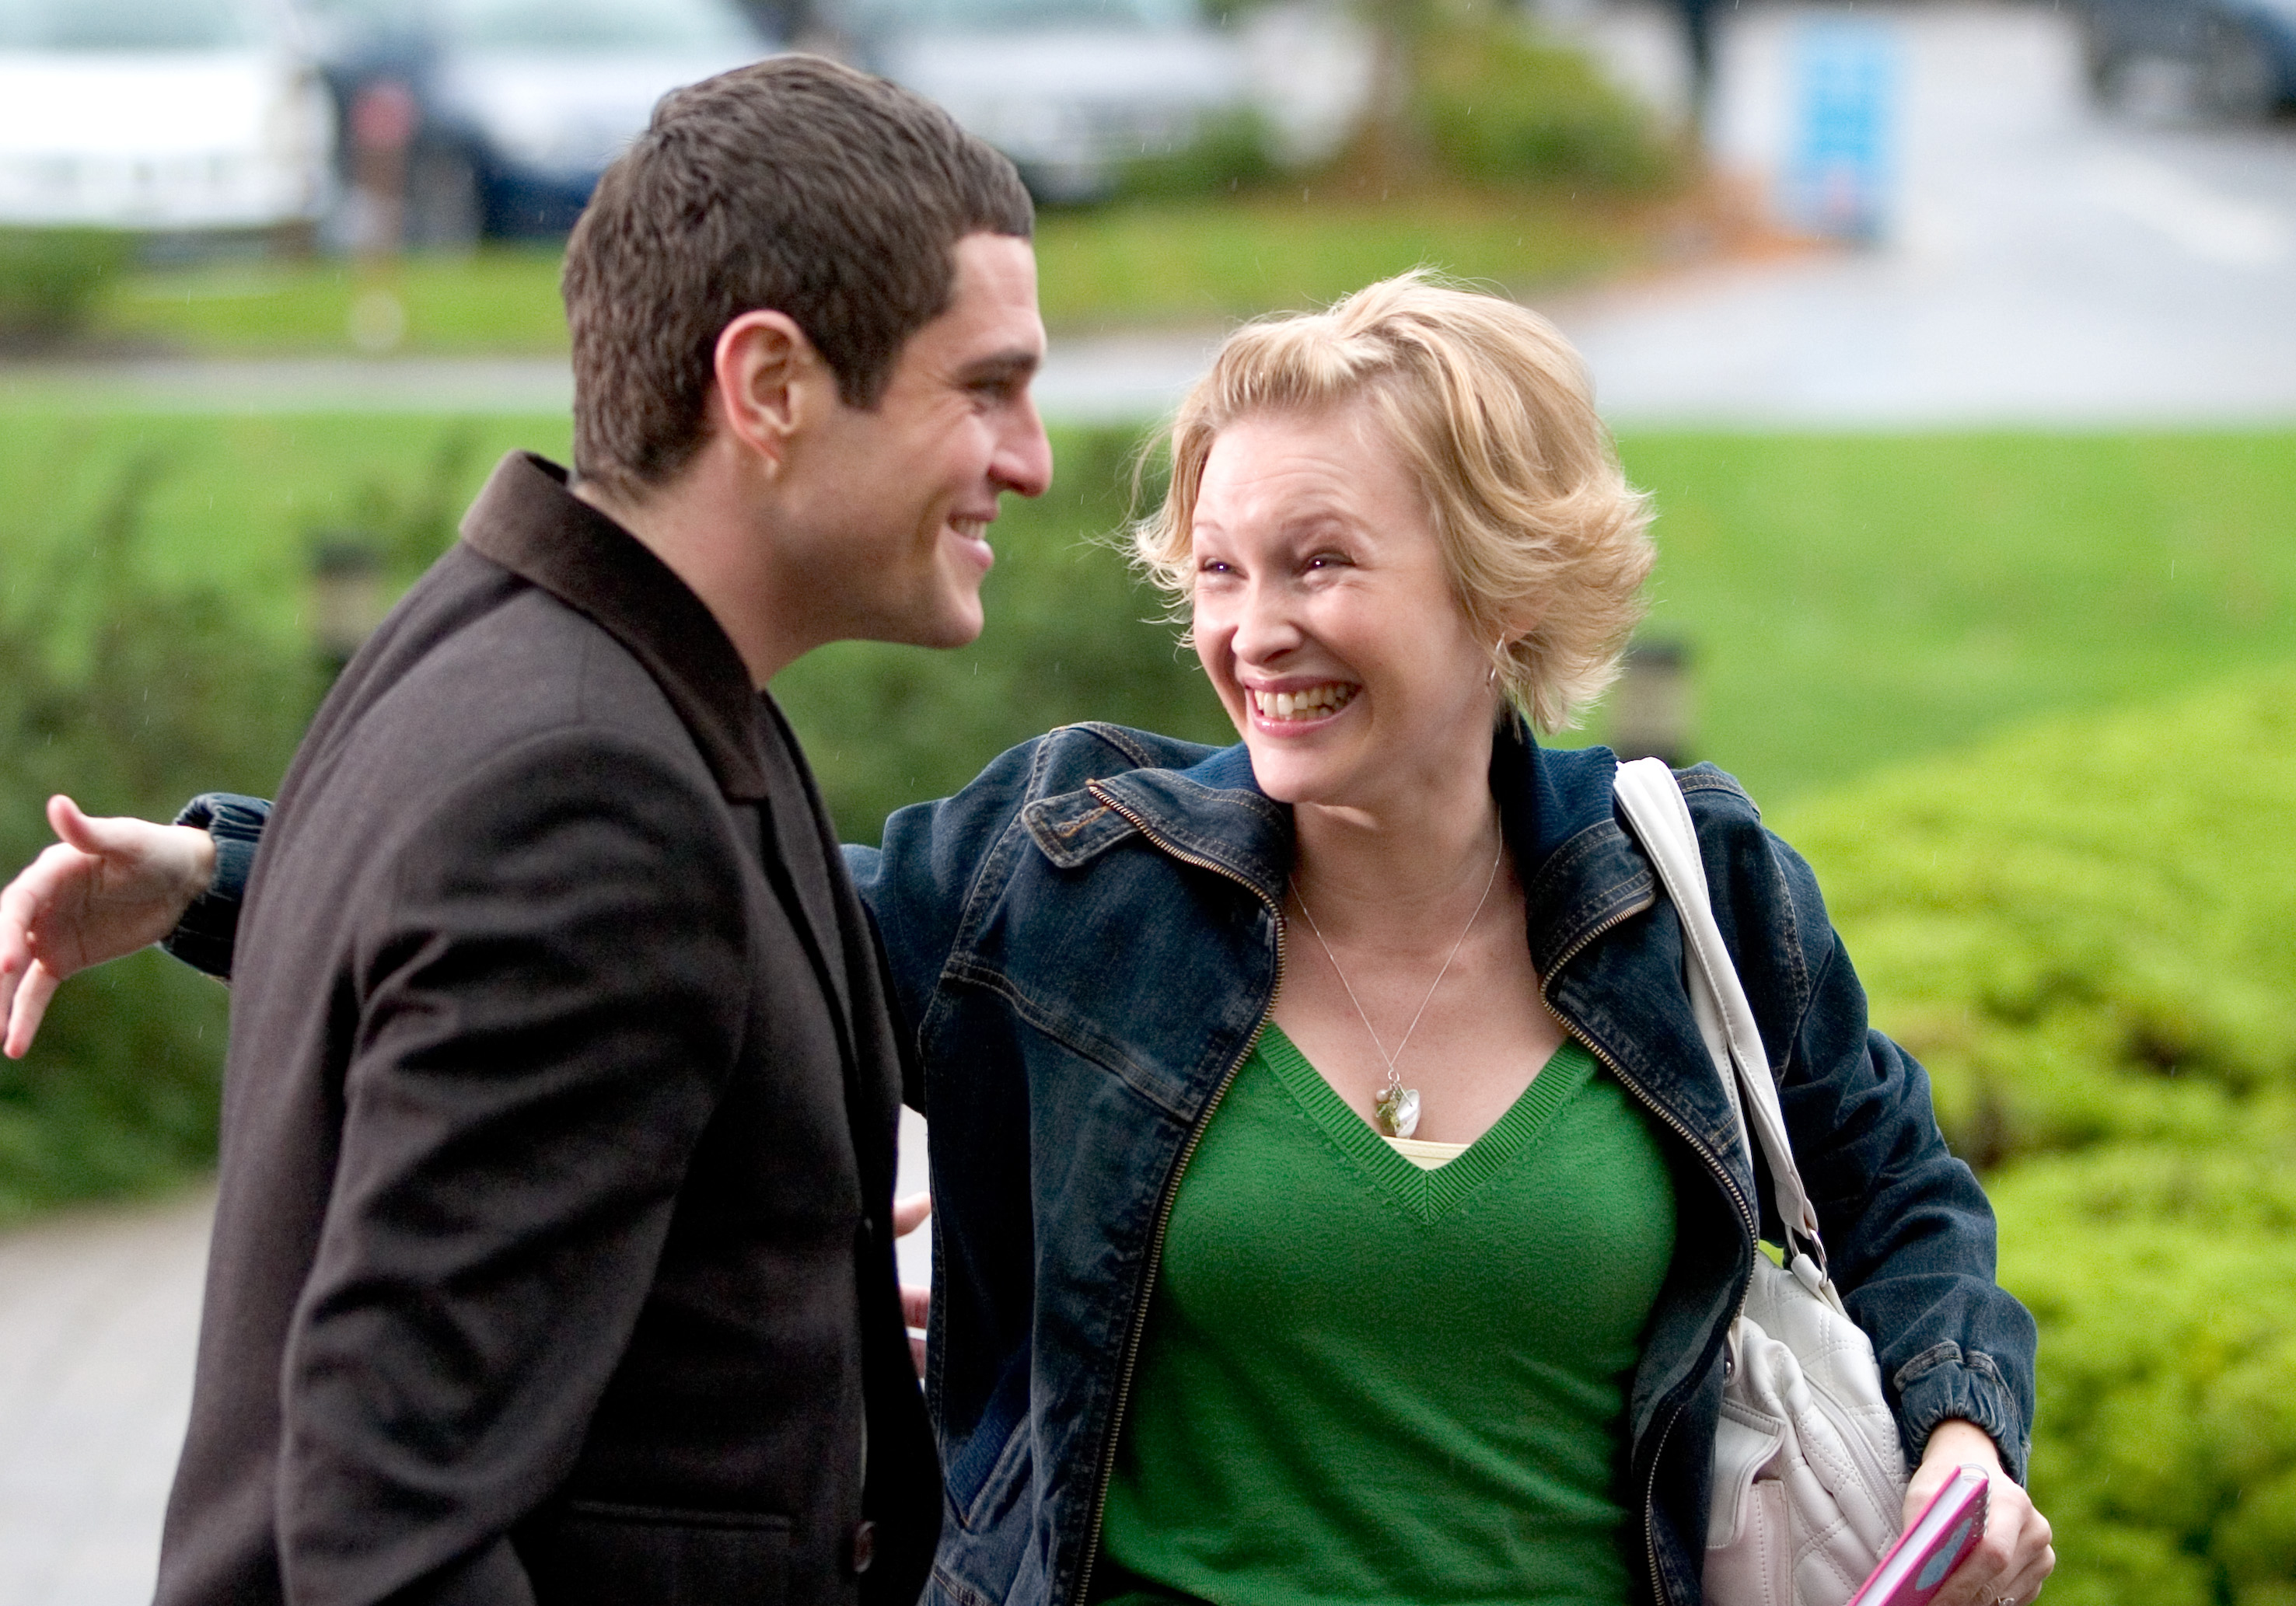 Still of Joanna Page and Mathew Horne in Gavin & Stacey (2007)